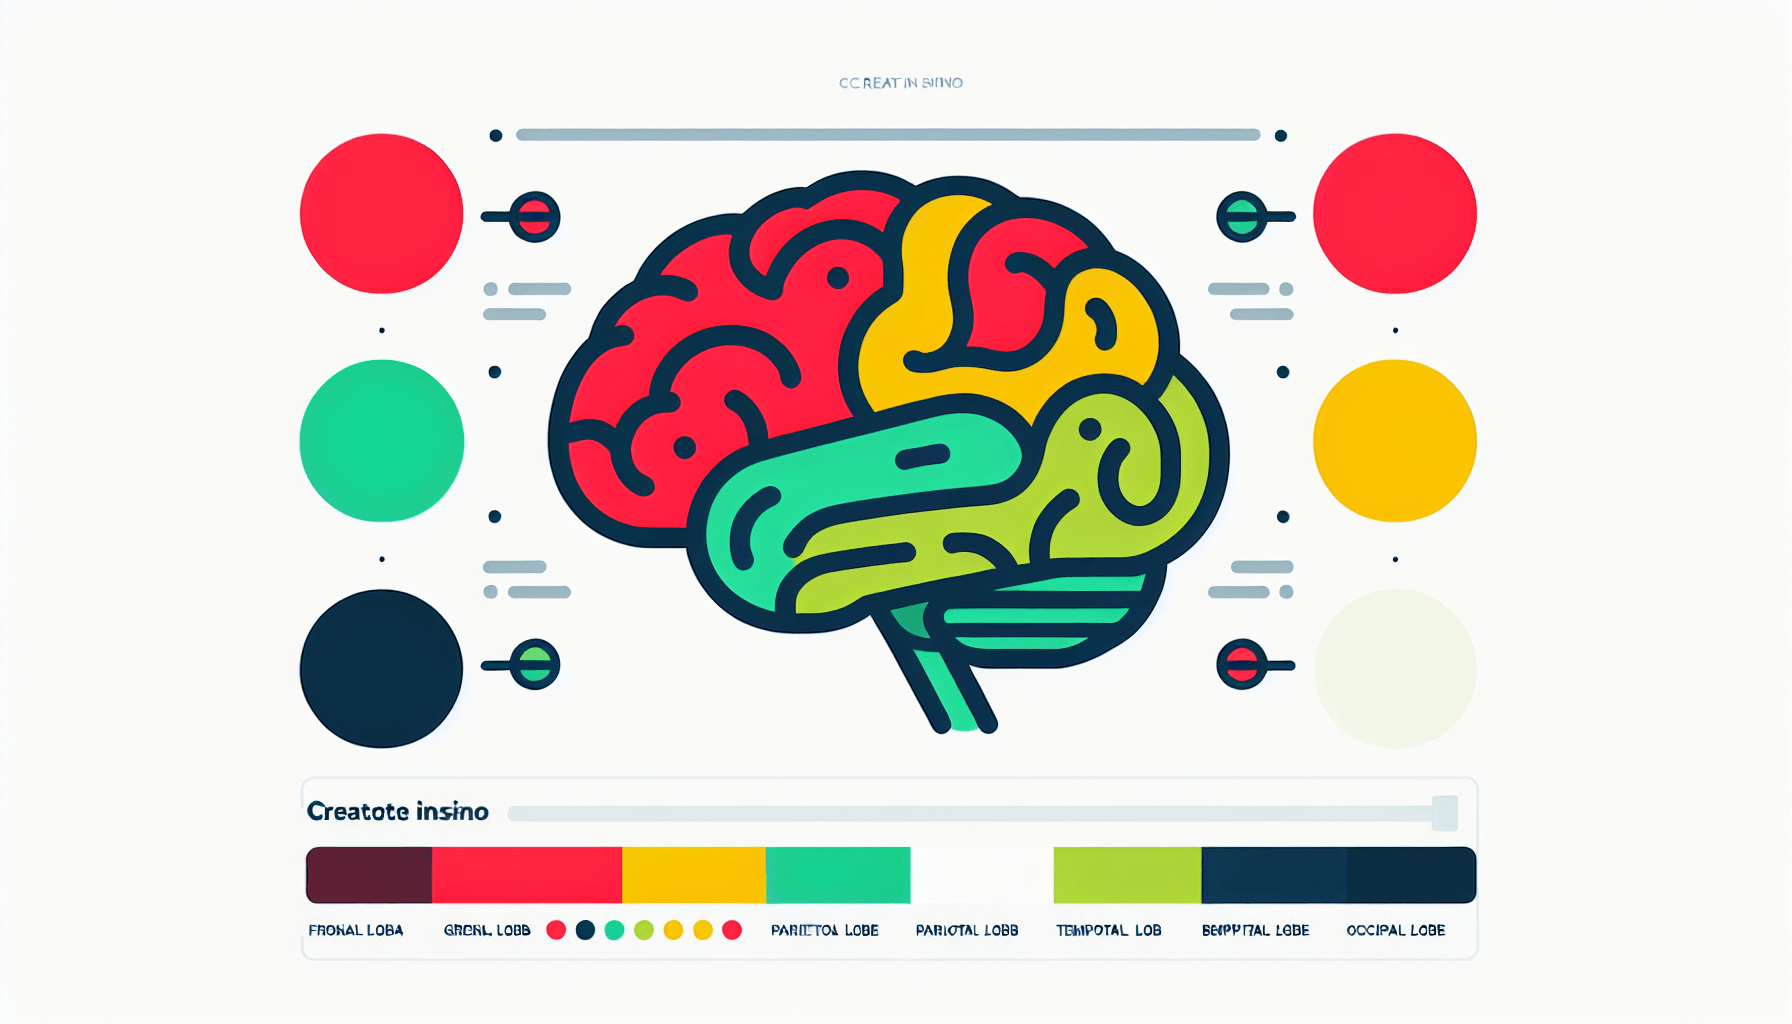 Brain in flat illustration style and white background, red #f47574, green #88c7a8, yellow #fcc44b, and blue #645bc8 colors.